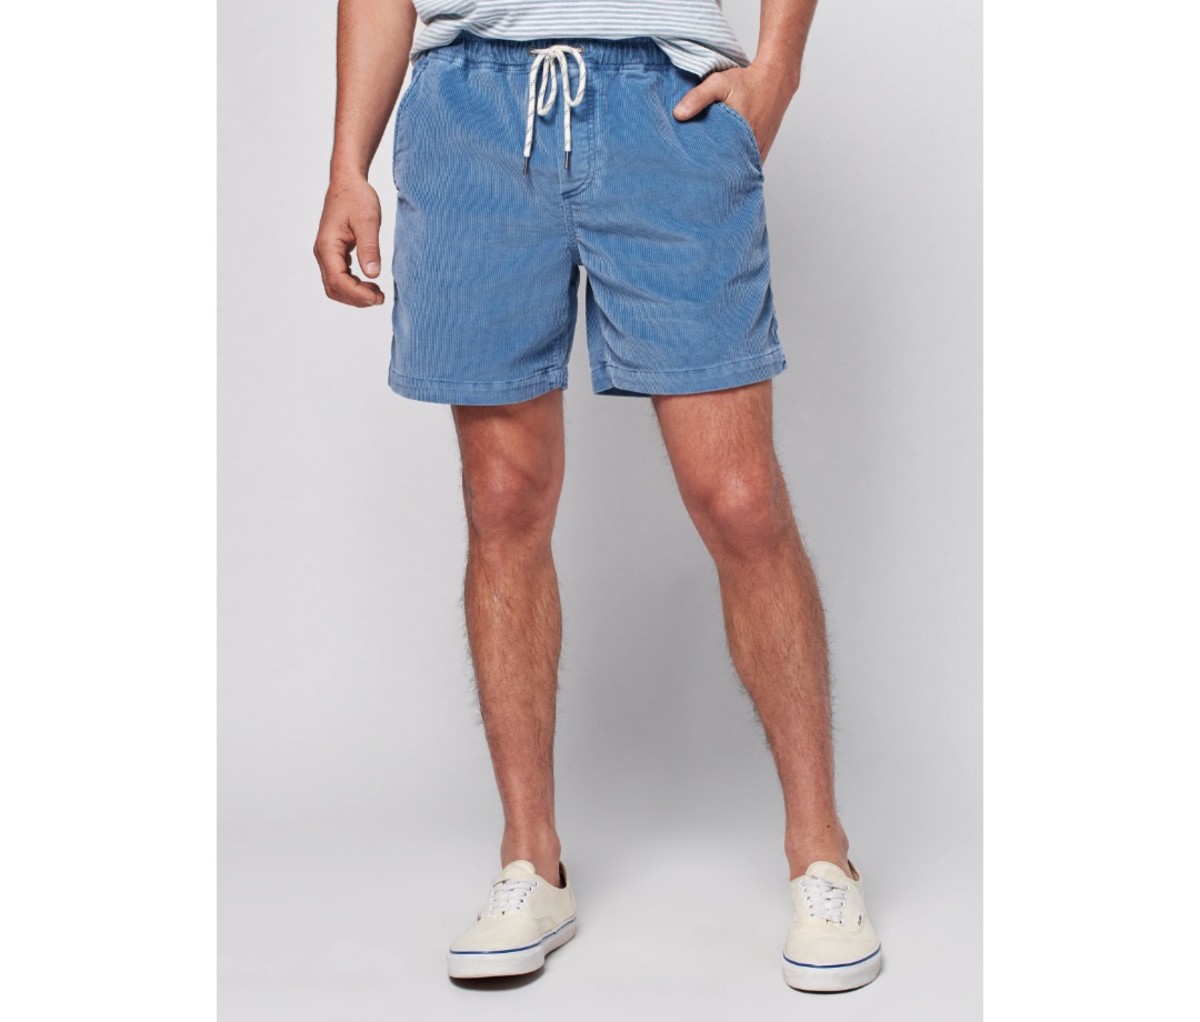 These 'Breathable' Summer Shorts Are Trending on